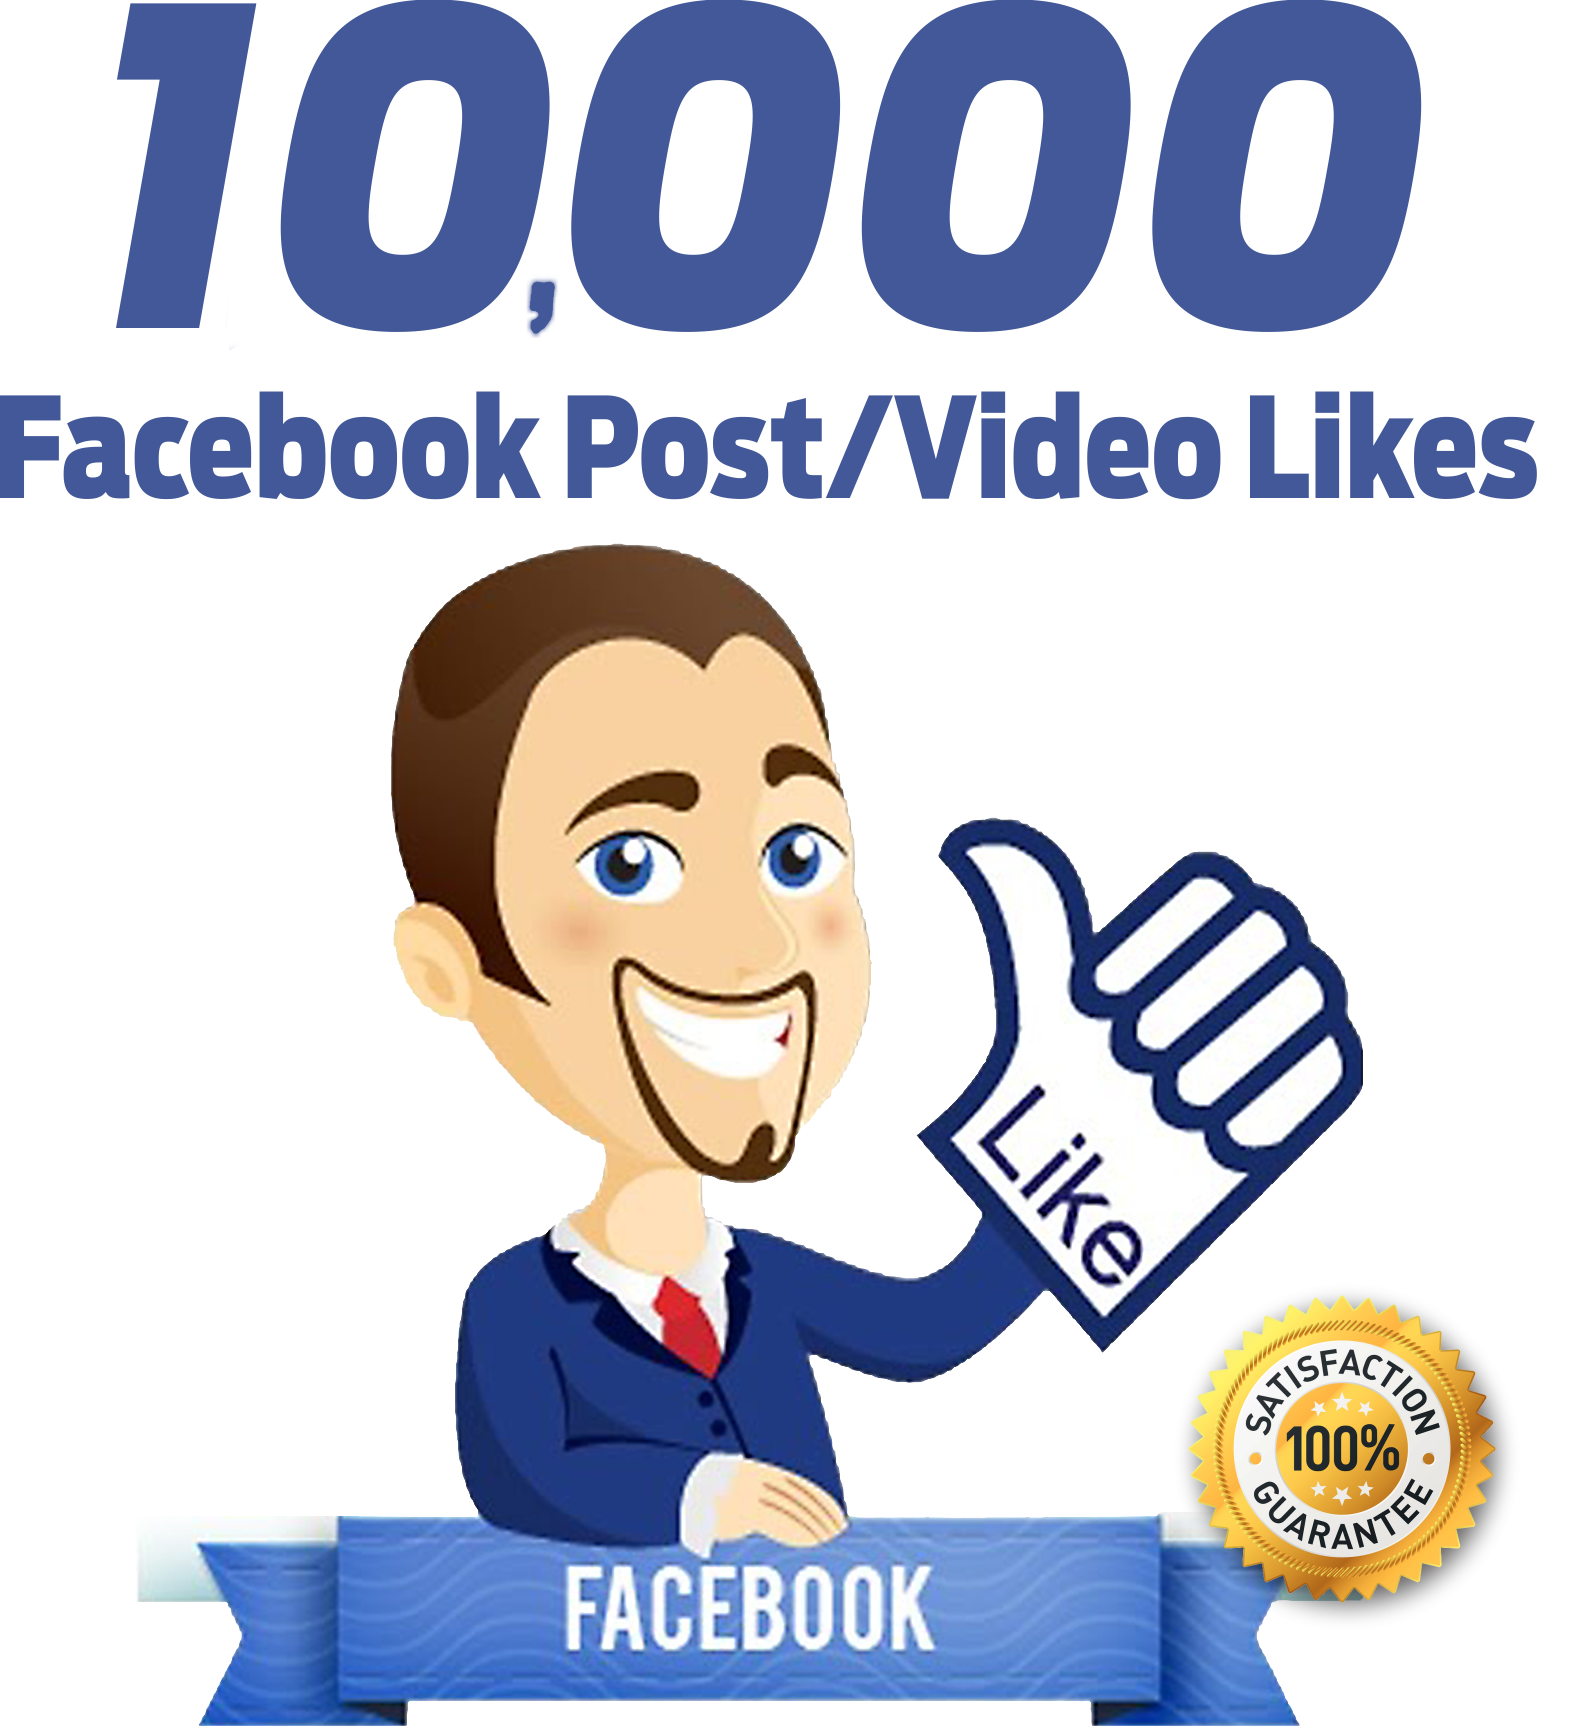 10000 facebook post video likes